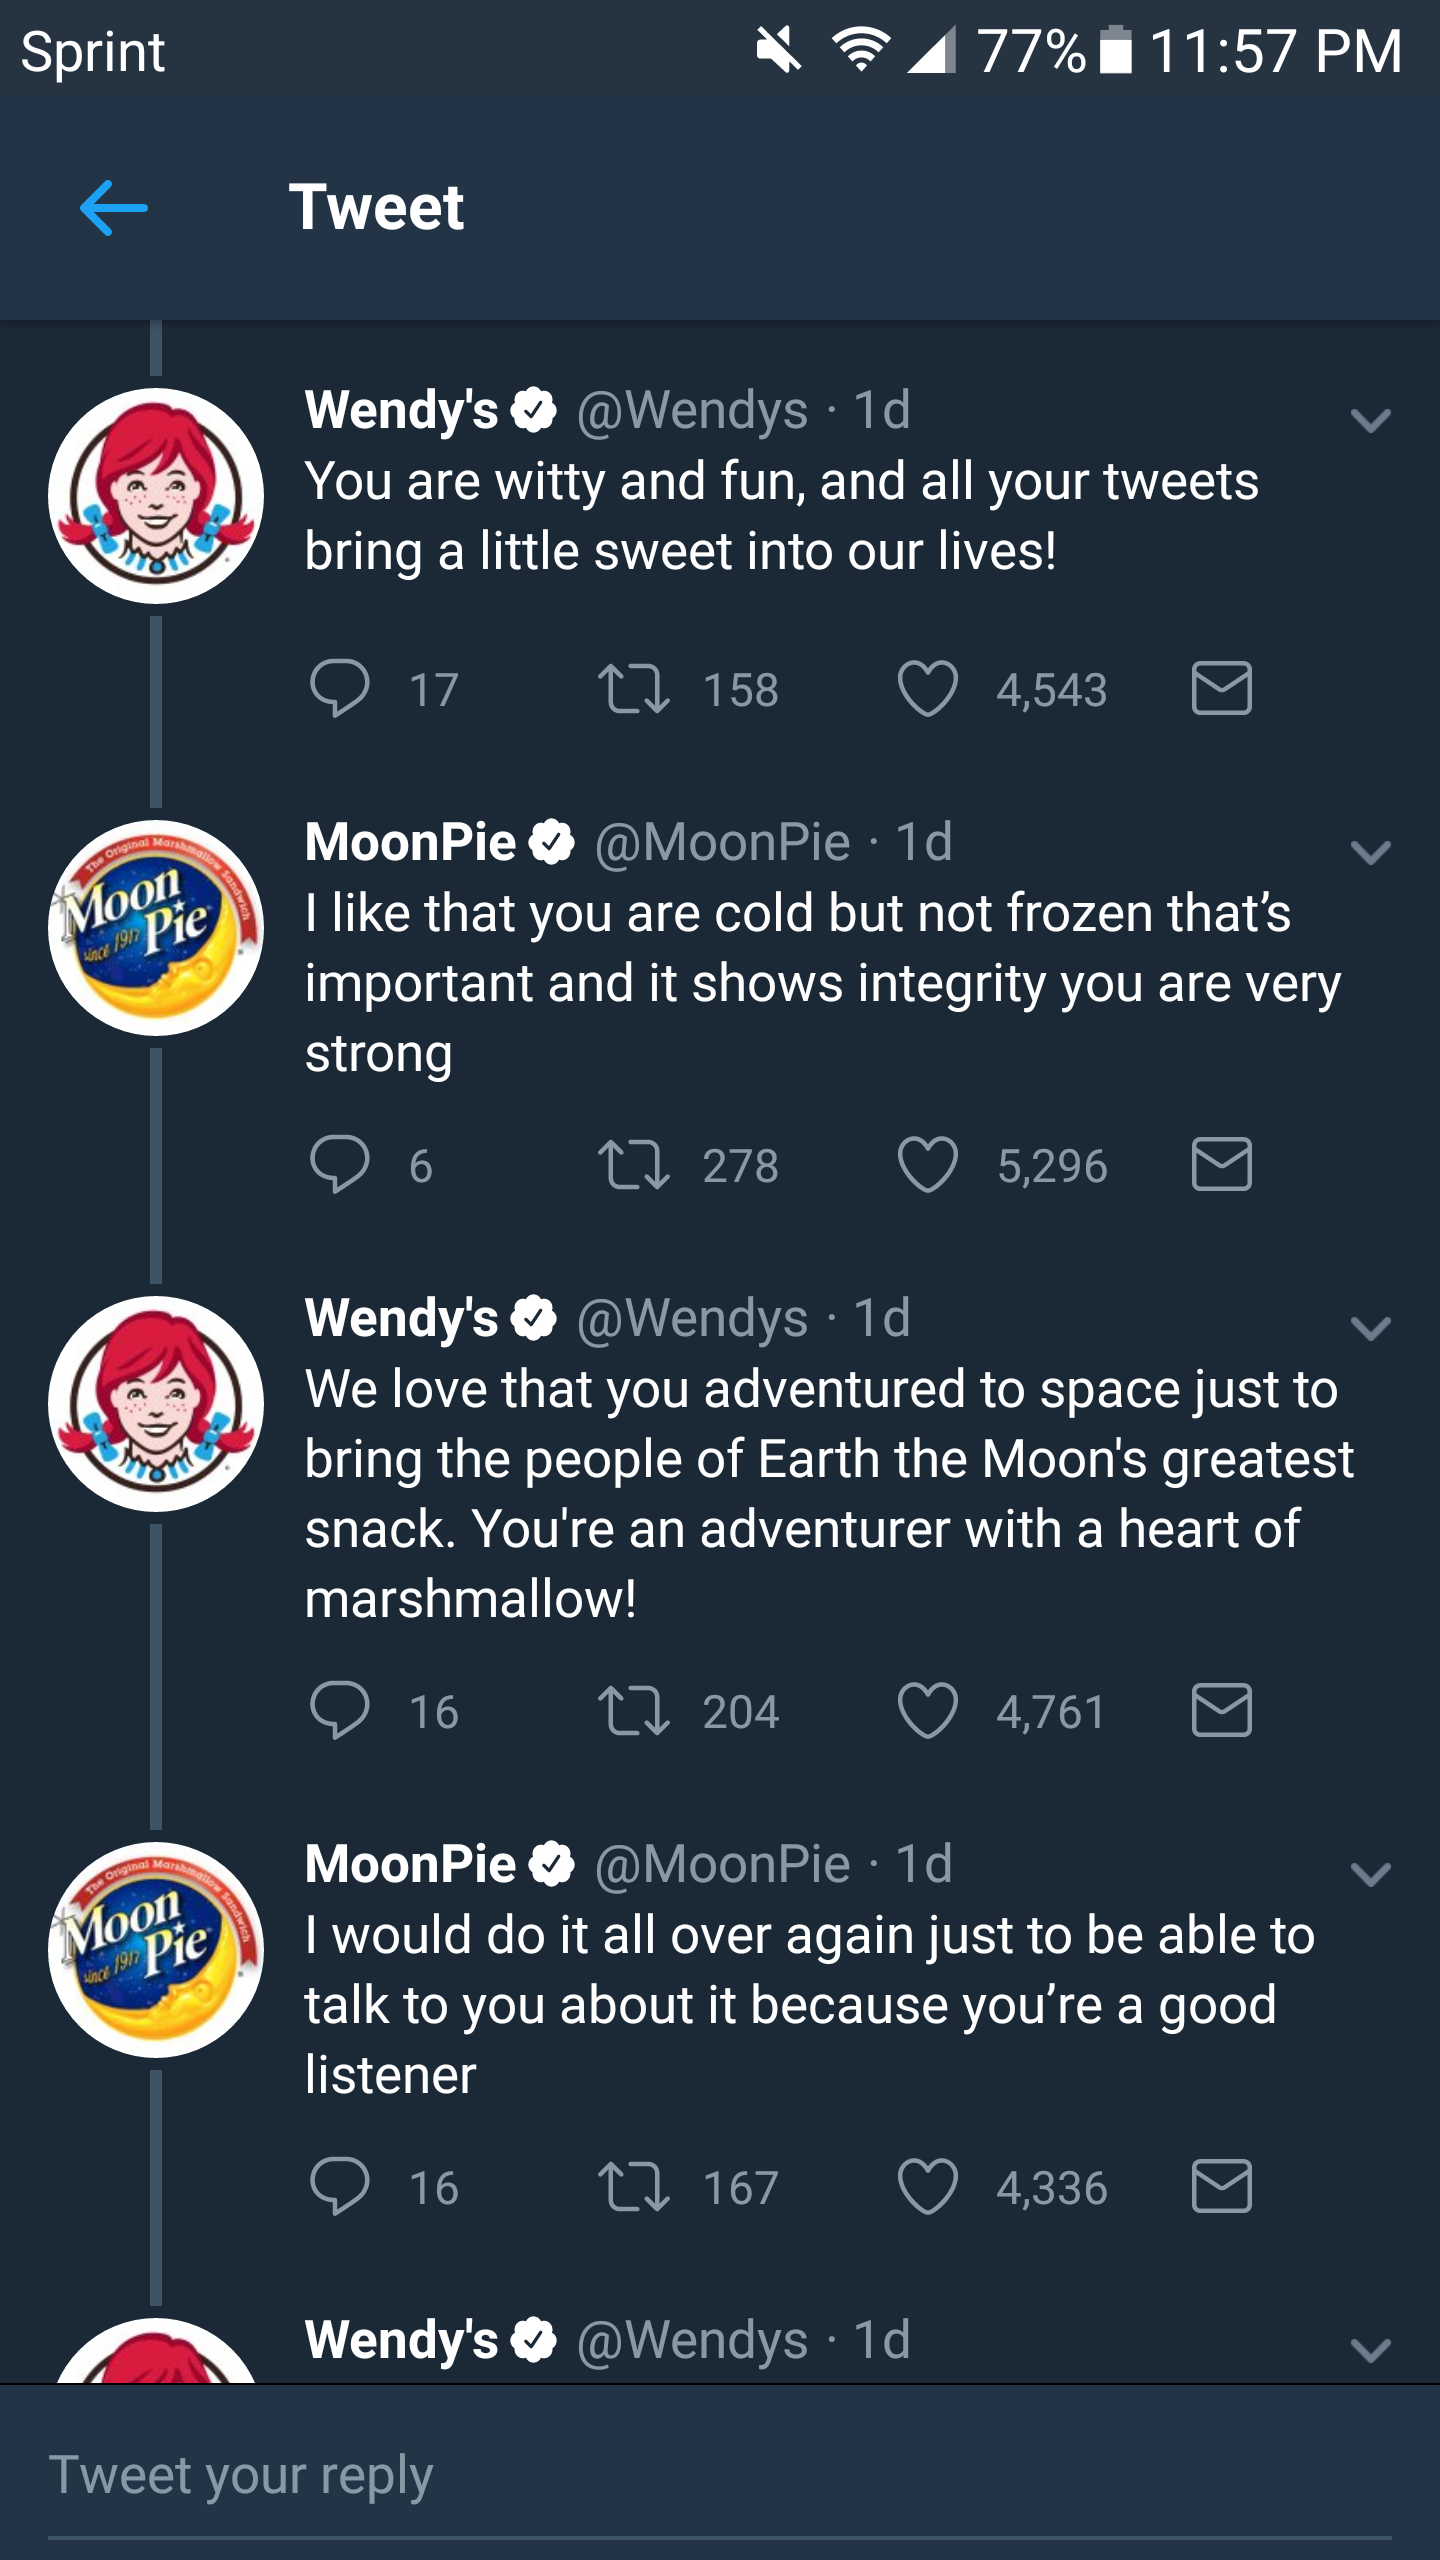 wendy's and moon pie twitter - Sprint 94 77% Tweet Wendy's Wendys 10 You are witty and fun, and all your tweets bring a little sweet into our lives! O 17 2158 4,543 Mopic MoonPie 1d I that you are cold but not frozen that's important and it shows integrit